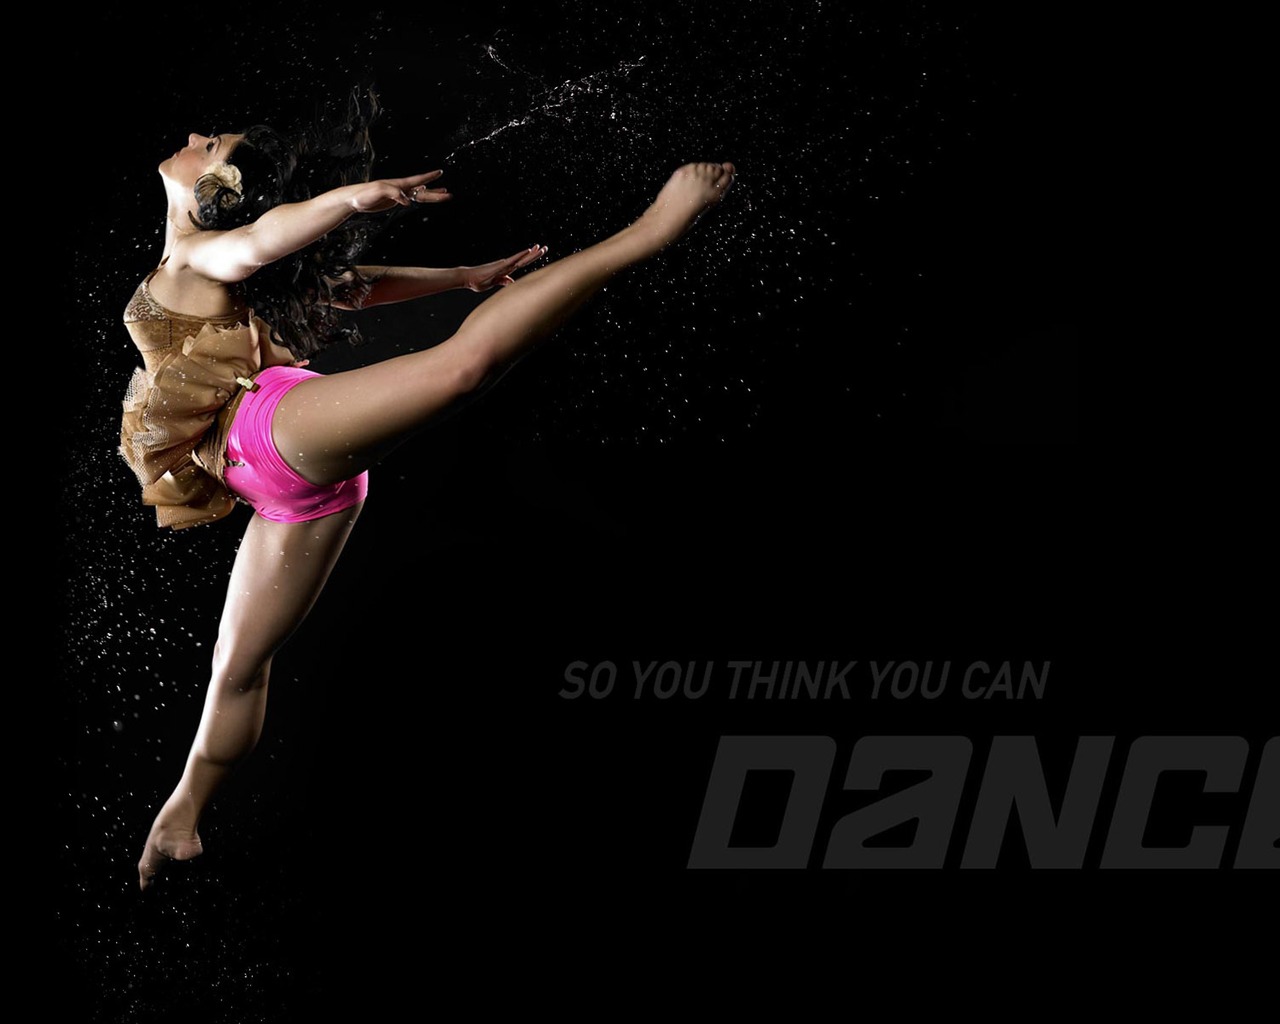 So You Think You Can Dance wallpaper (1) #17 - 1280x1024